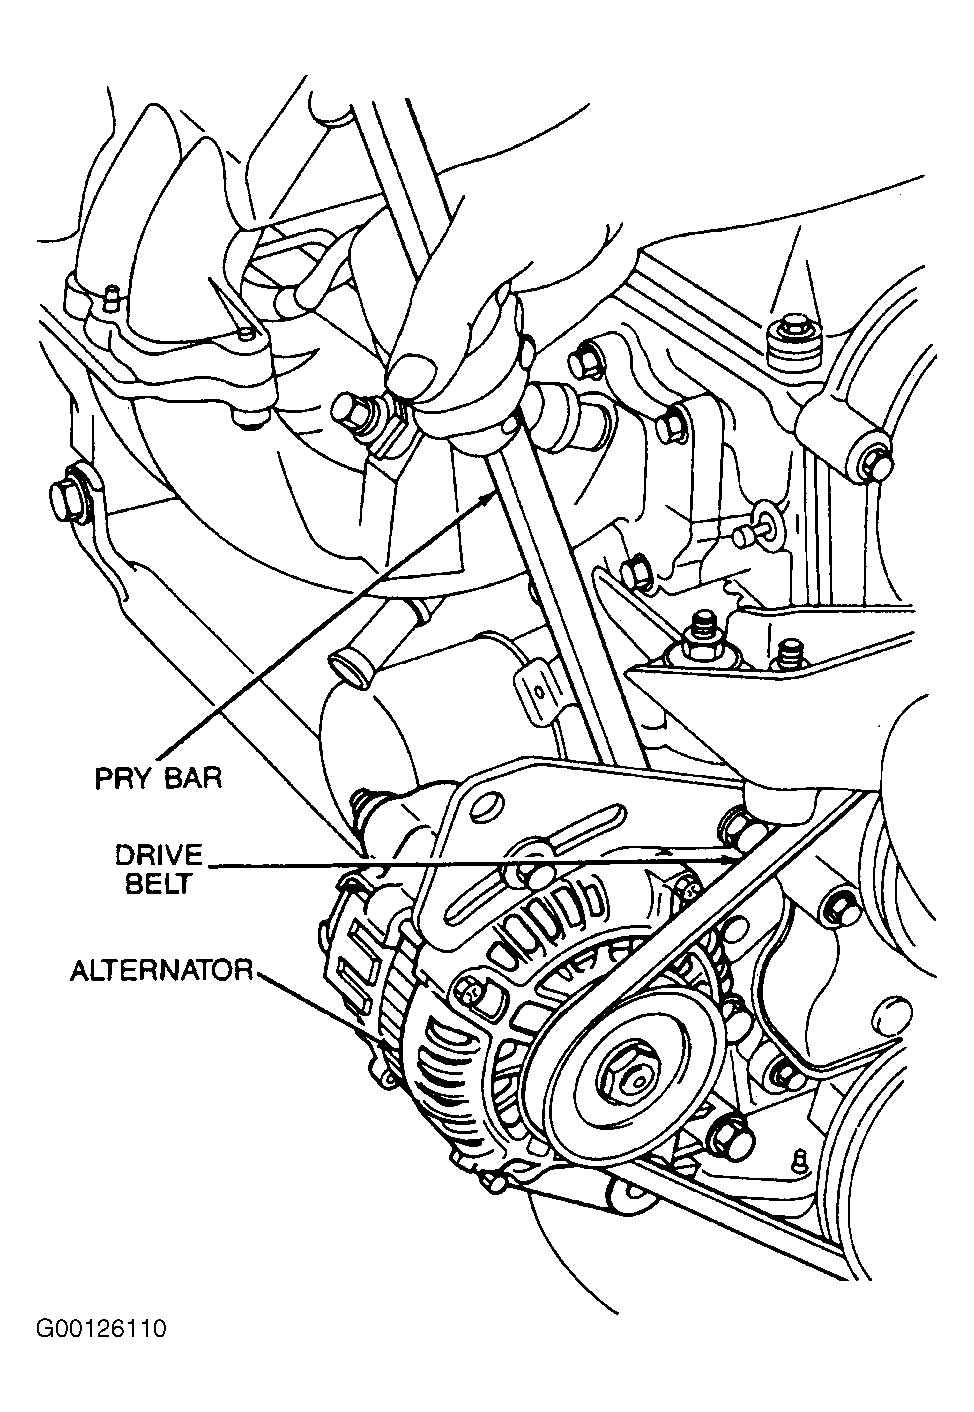 1993 Ford Festiva Serpentine Belt Routing and Timing Belt Diagrams